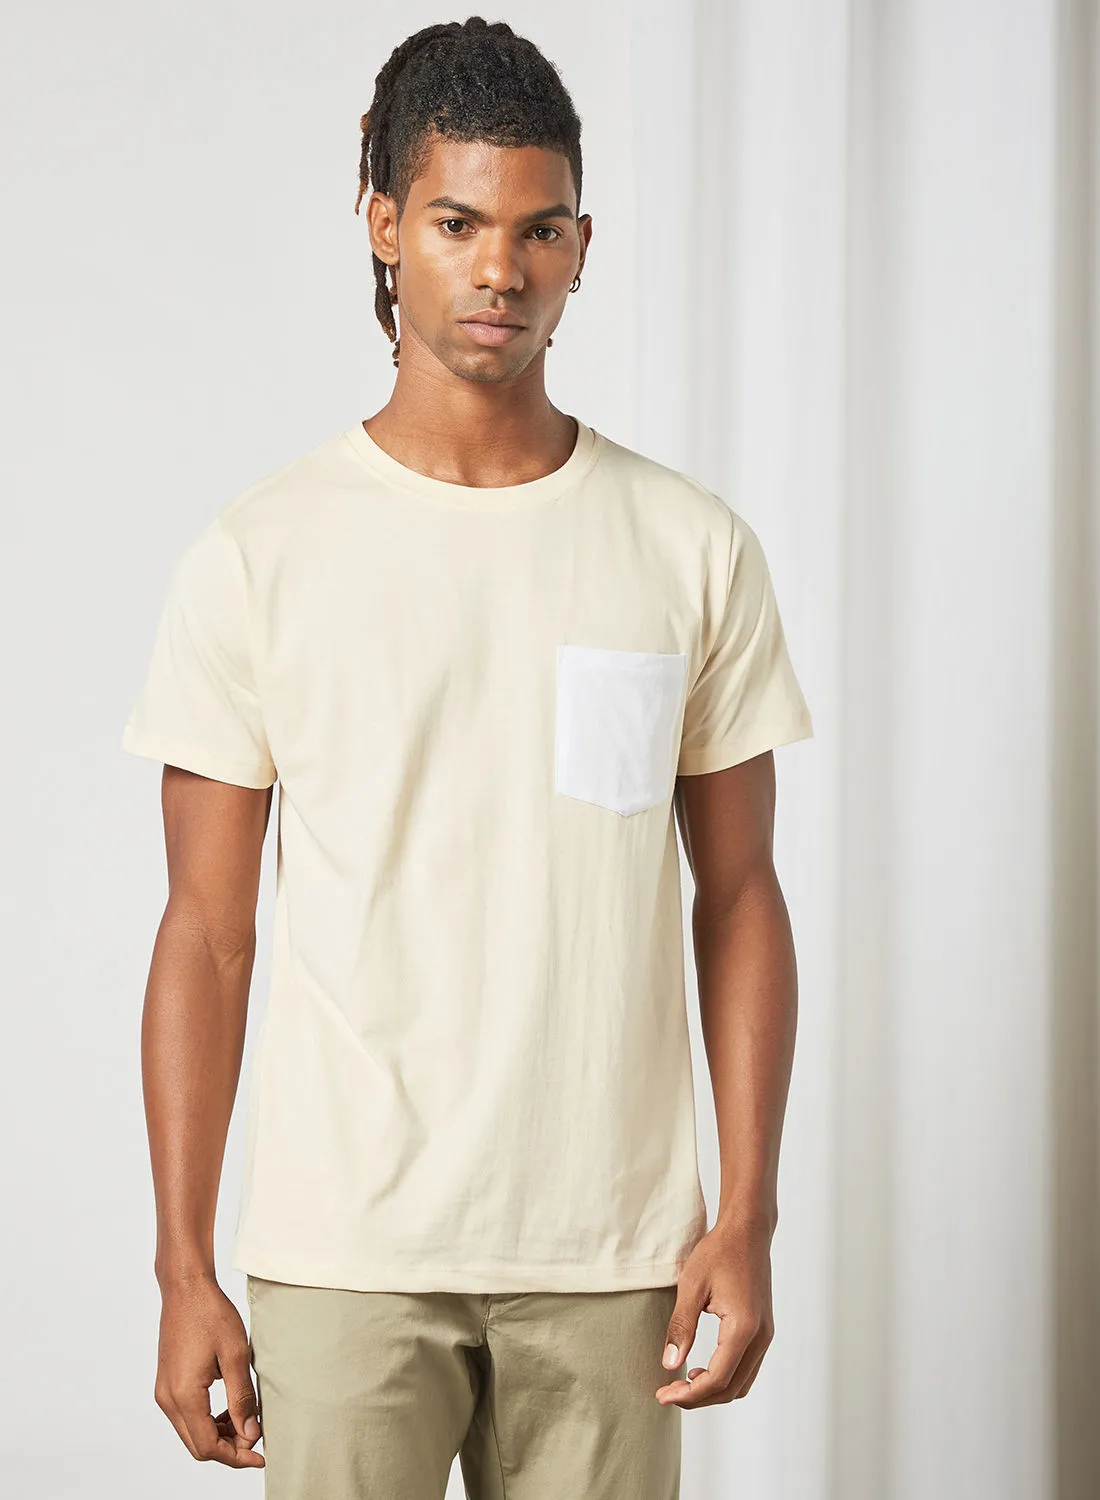 STATE 8 Patch Pocket T-Shirt Beige